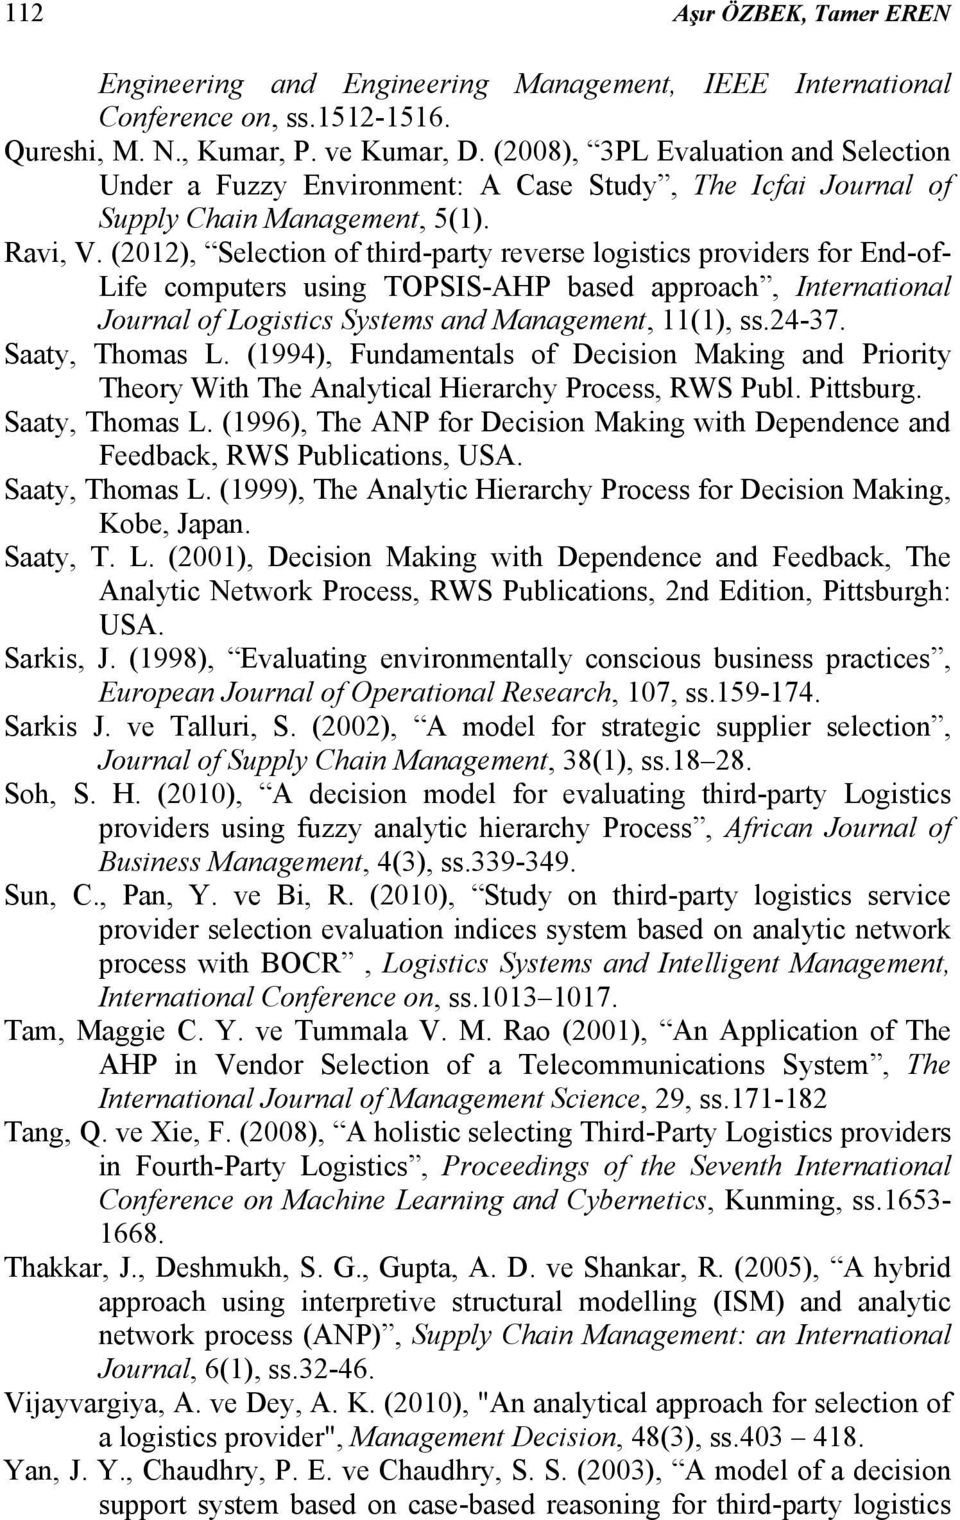 (2012), Selection of third-party reverse logistics providers for End-of- Life computers using TOPSIS-AHP based approach, International Journal of Logistics Systems and Management, 11(1), ss.24-37.